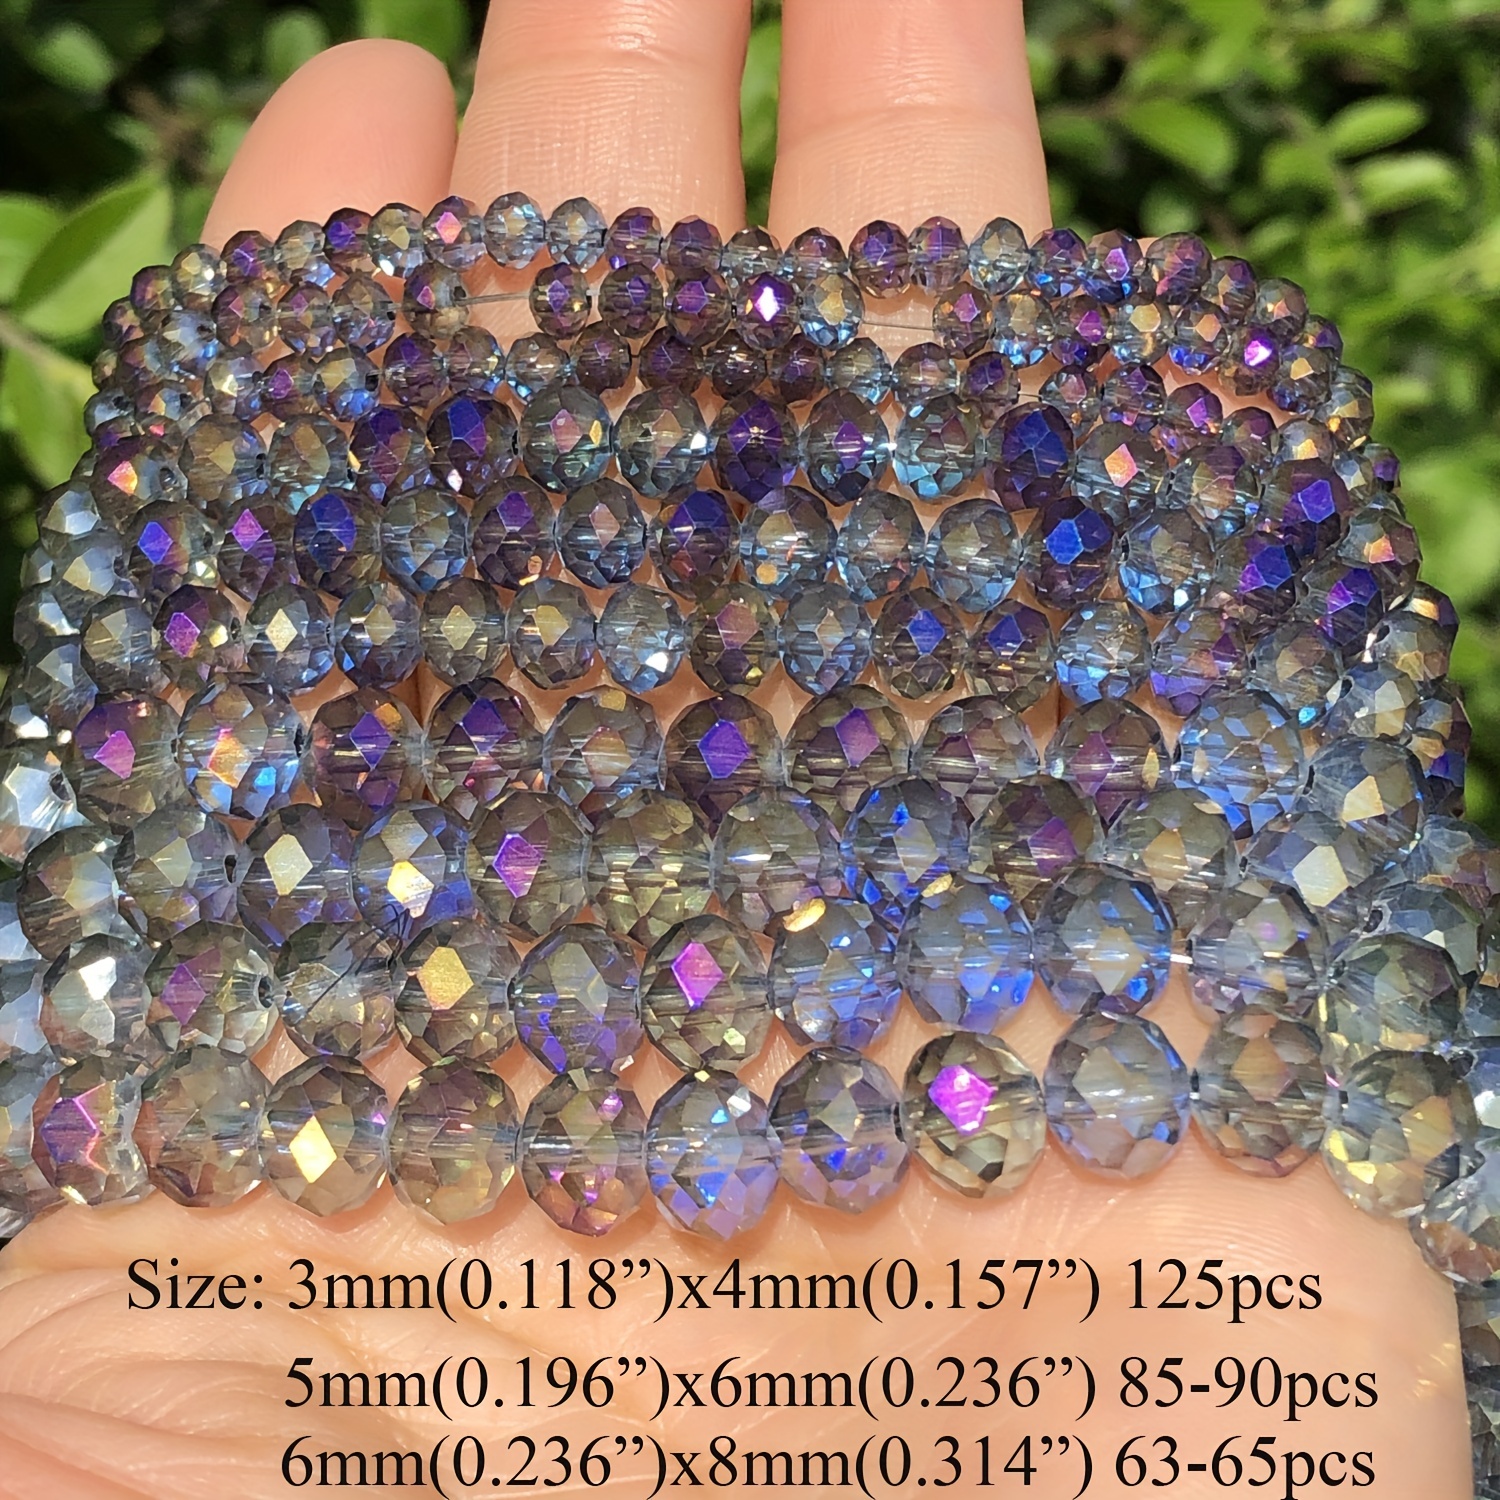 Iridescent Faceted Glass Beads 8mm